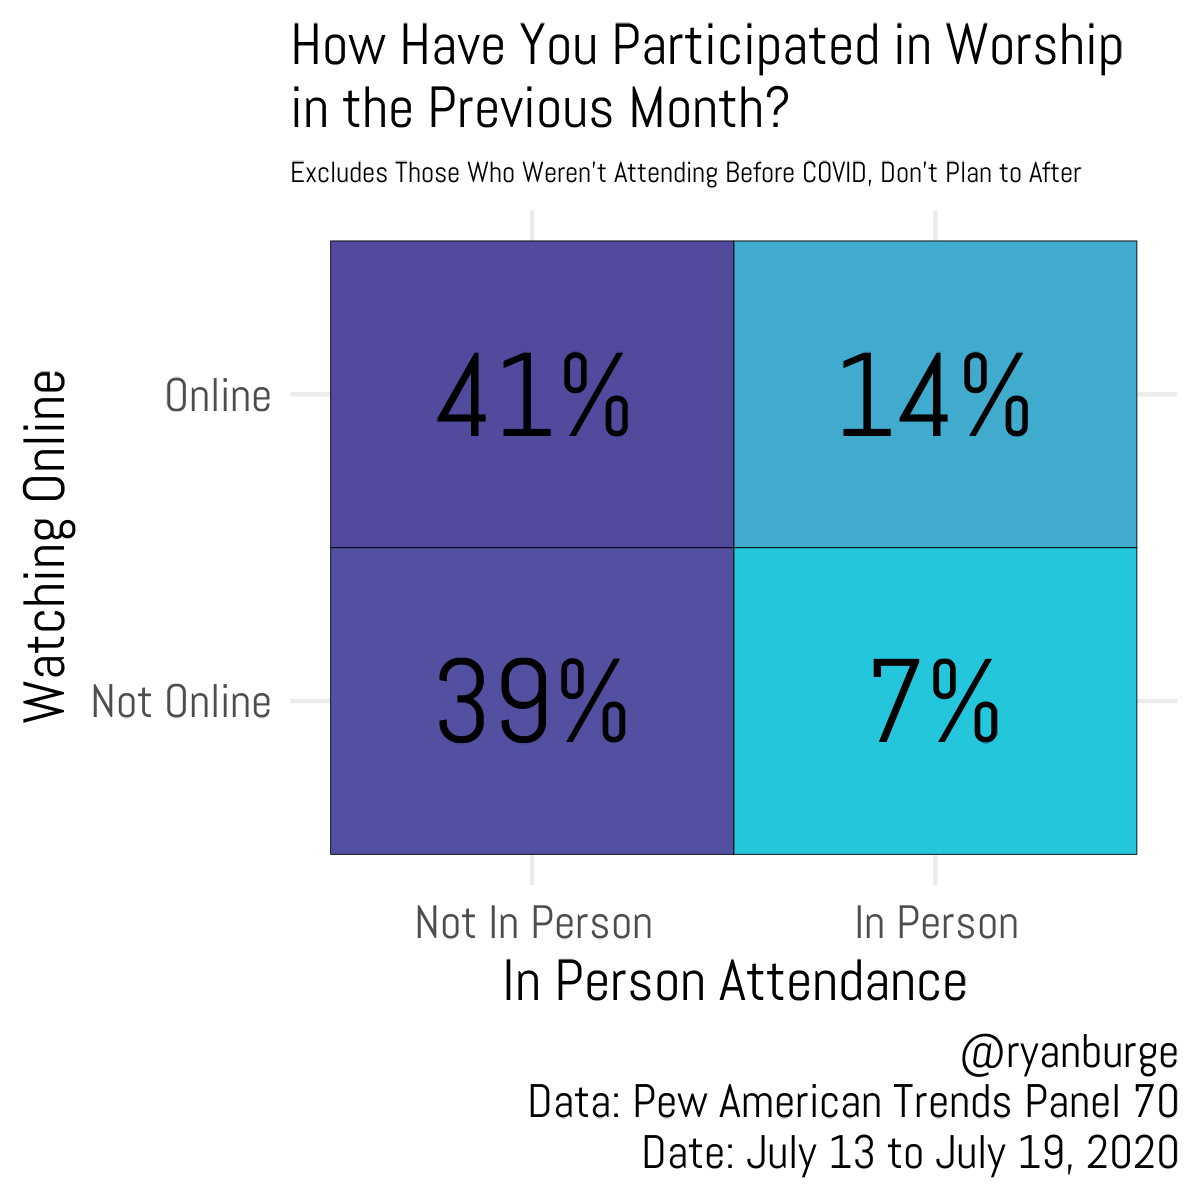 "How Have You Participated in Worship in the Previous Month?" Graphic courtesy of Ryan Burge